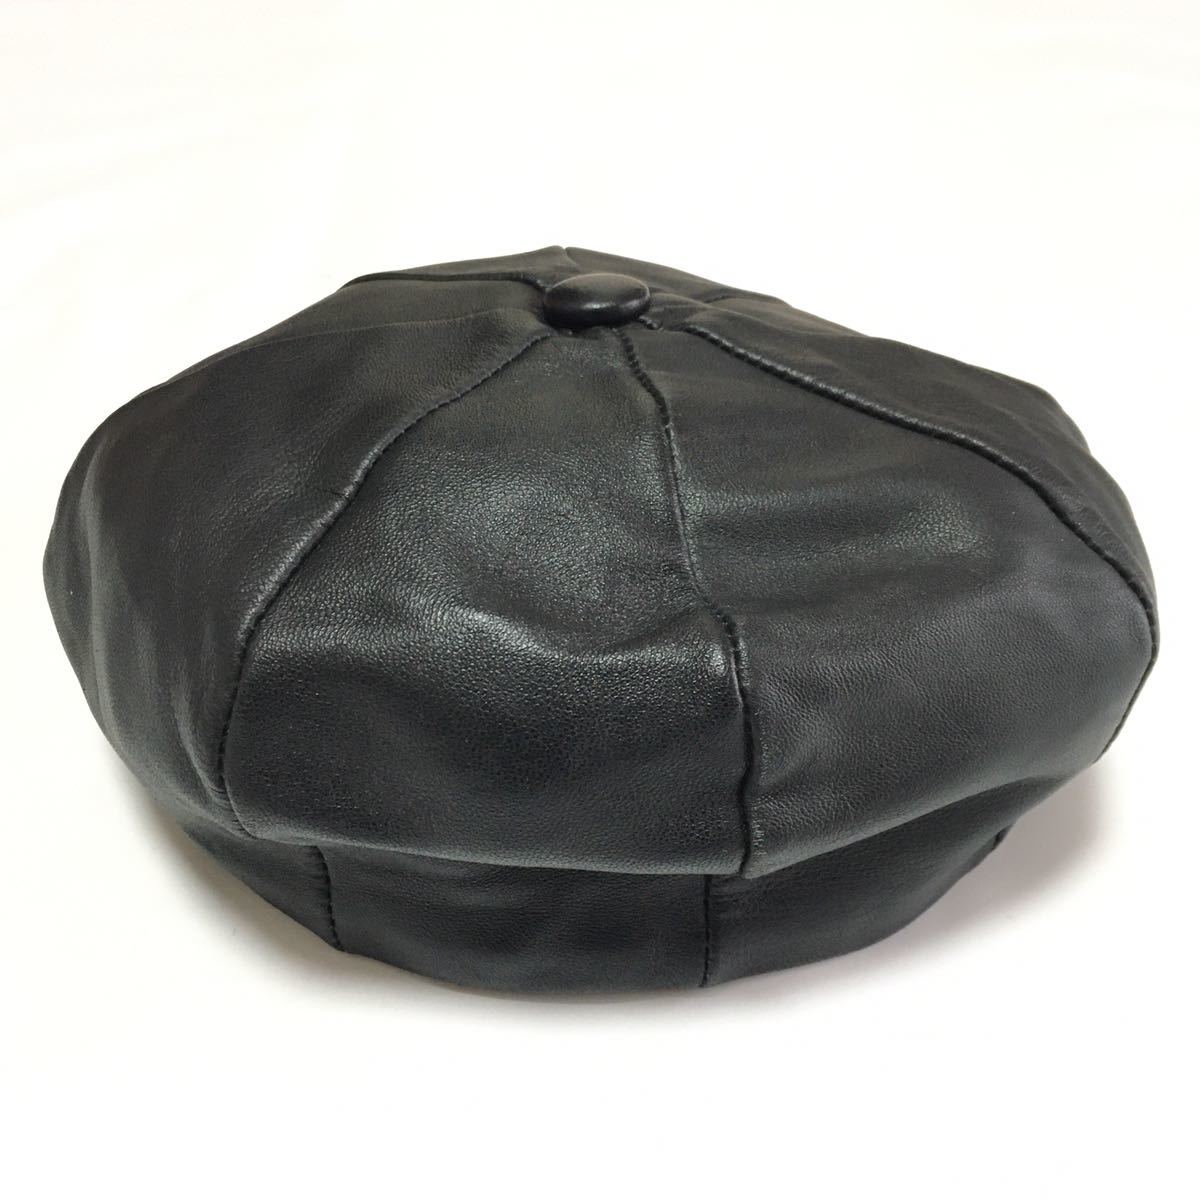  New York Hat * NEW YORK HAT all leather Casquette black black hat America made USA made leather hat hunting cap men's 